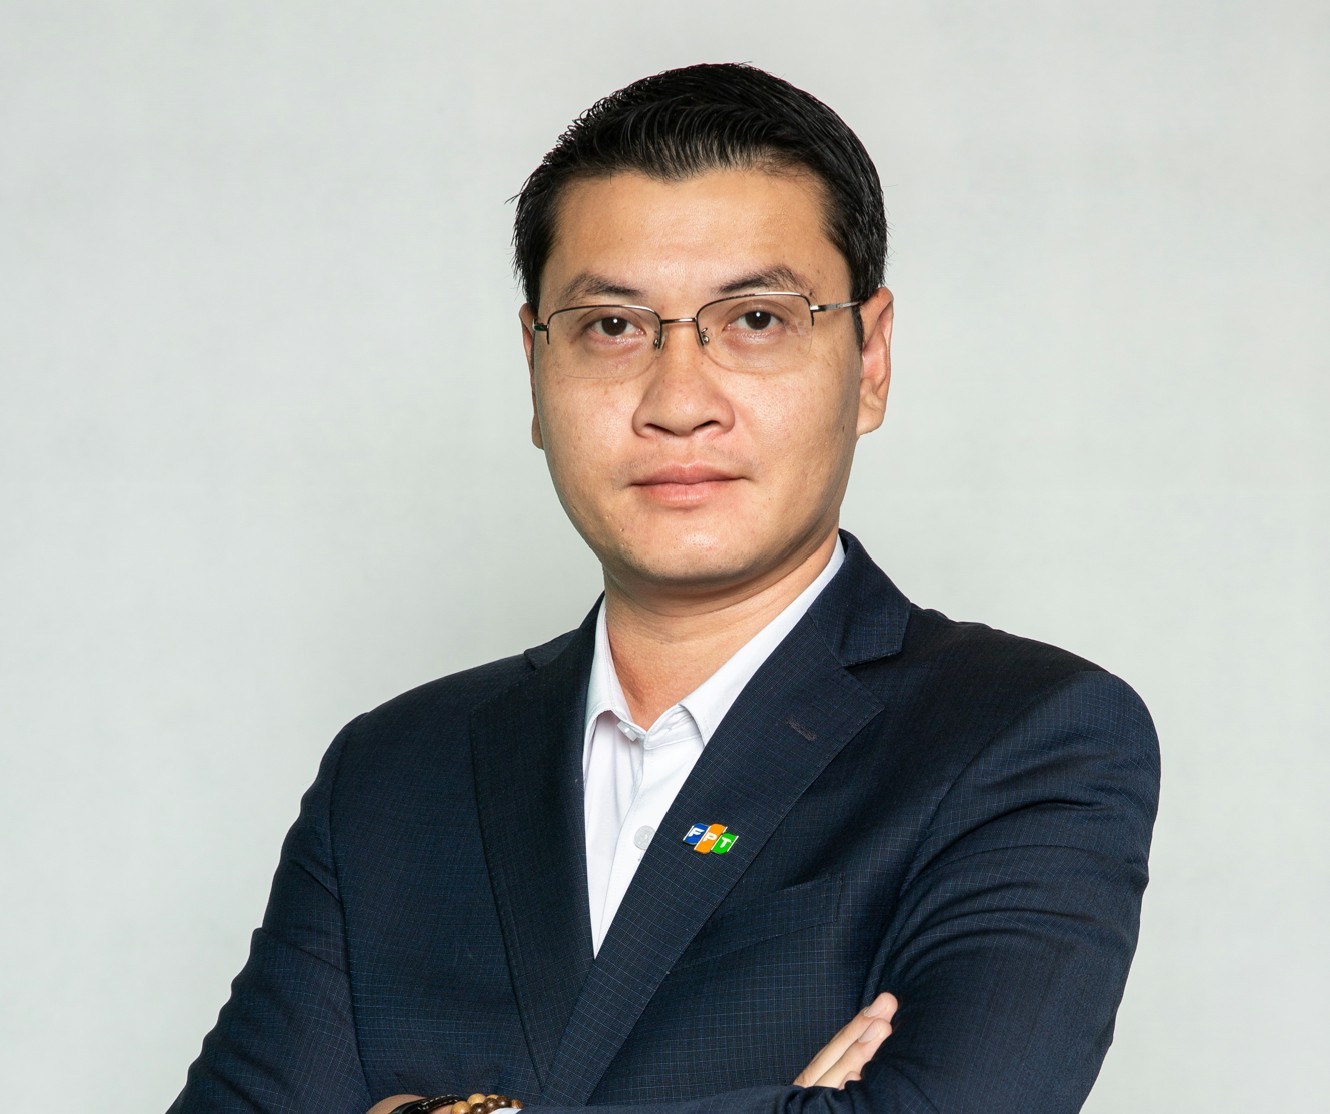 Mr. Phuong Dang - CEO of FPT USA Corporation